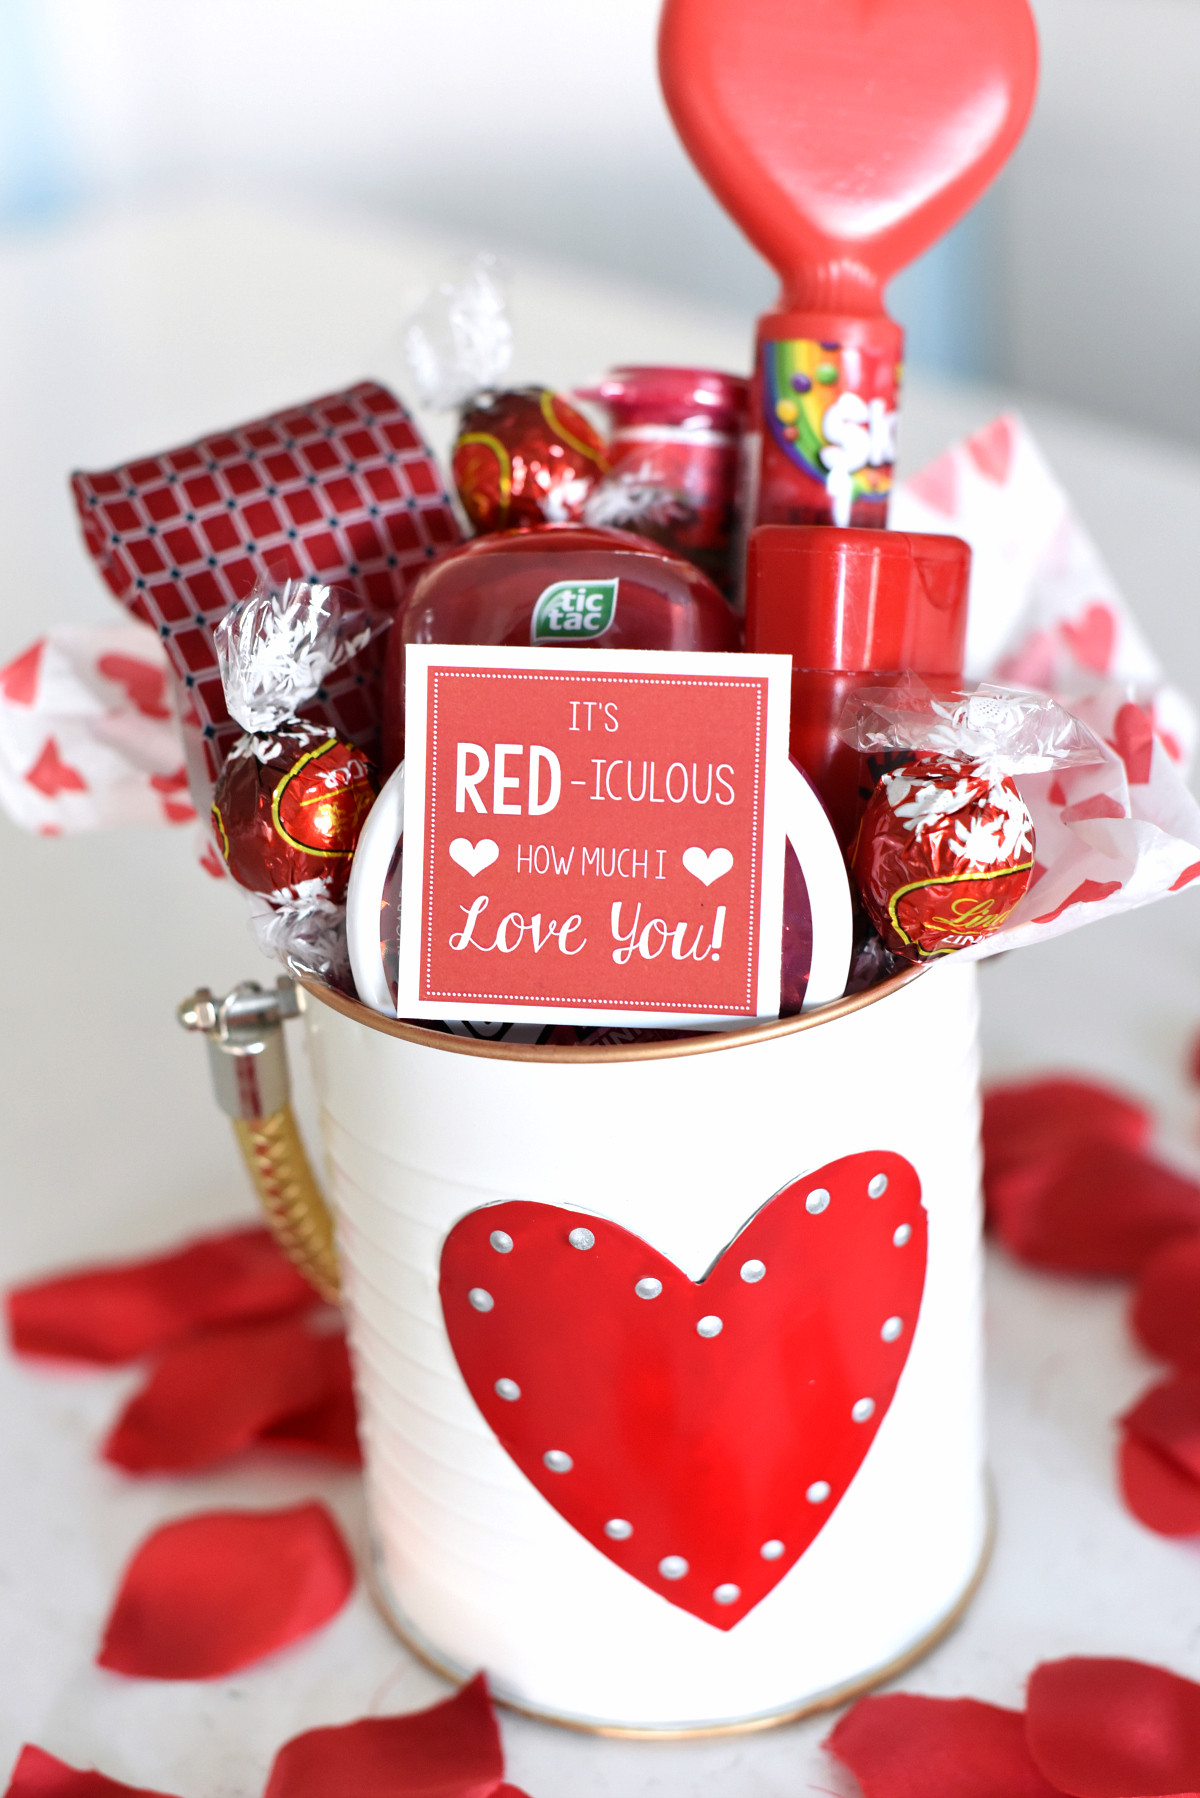 Gift Ideas For Kids For Valentines Day
 25 DIY Valentine s Day Gift Ideas Teens Will Love